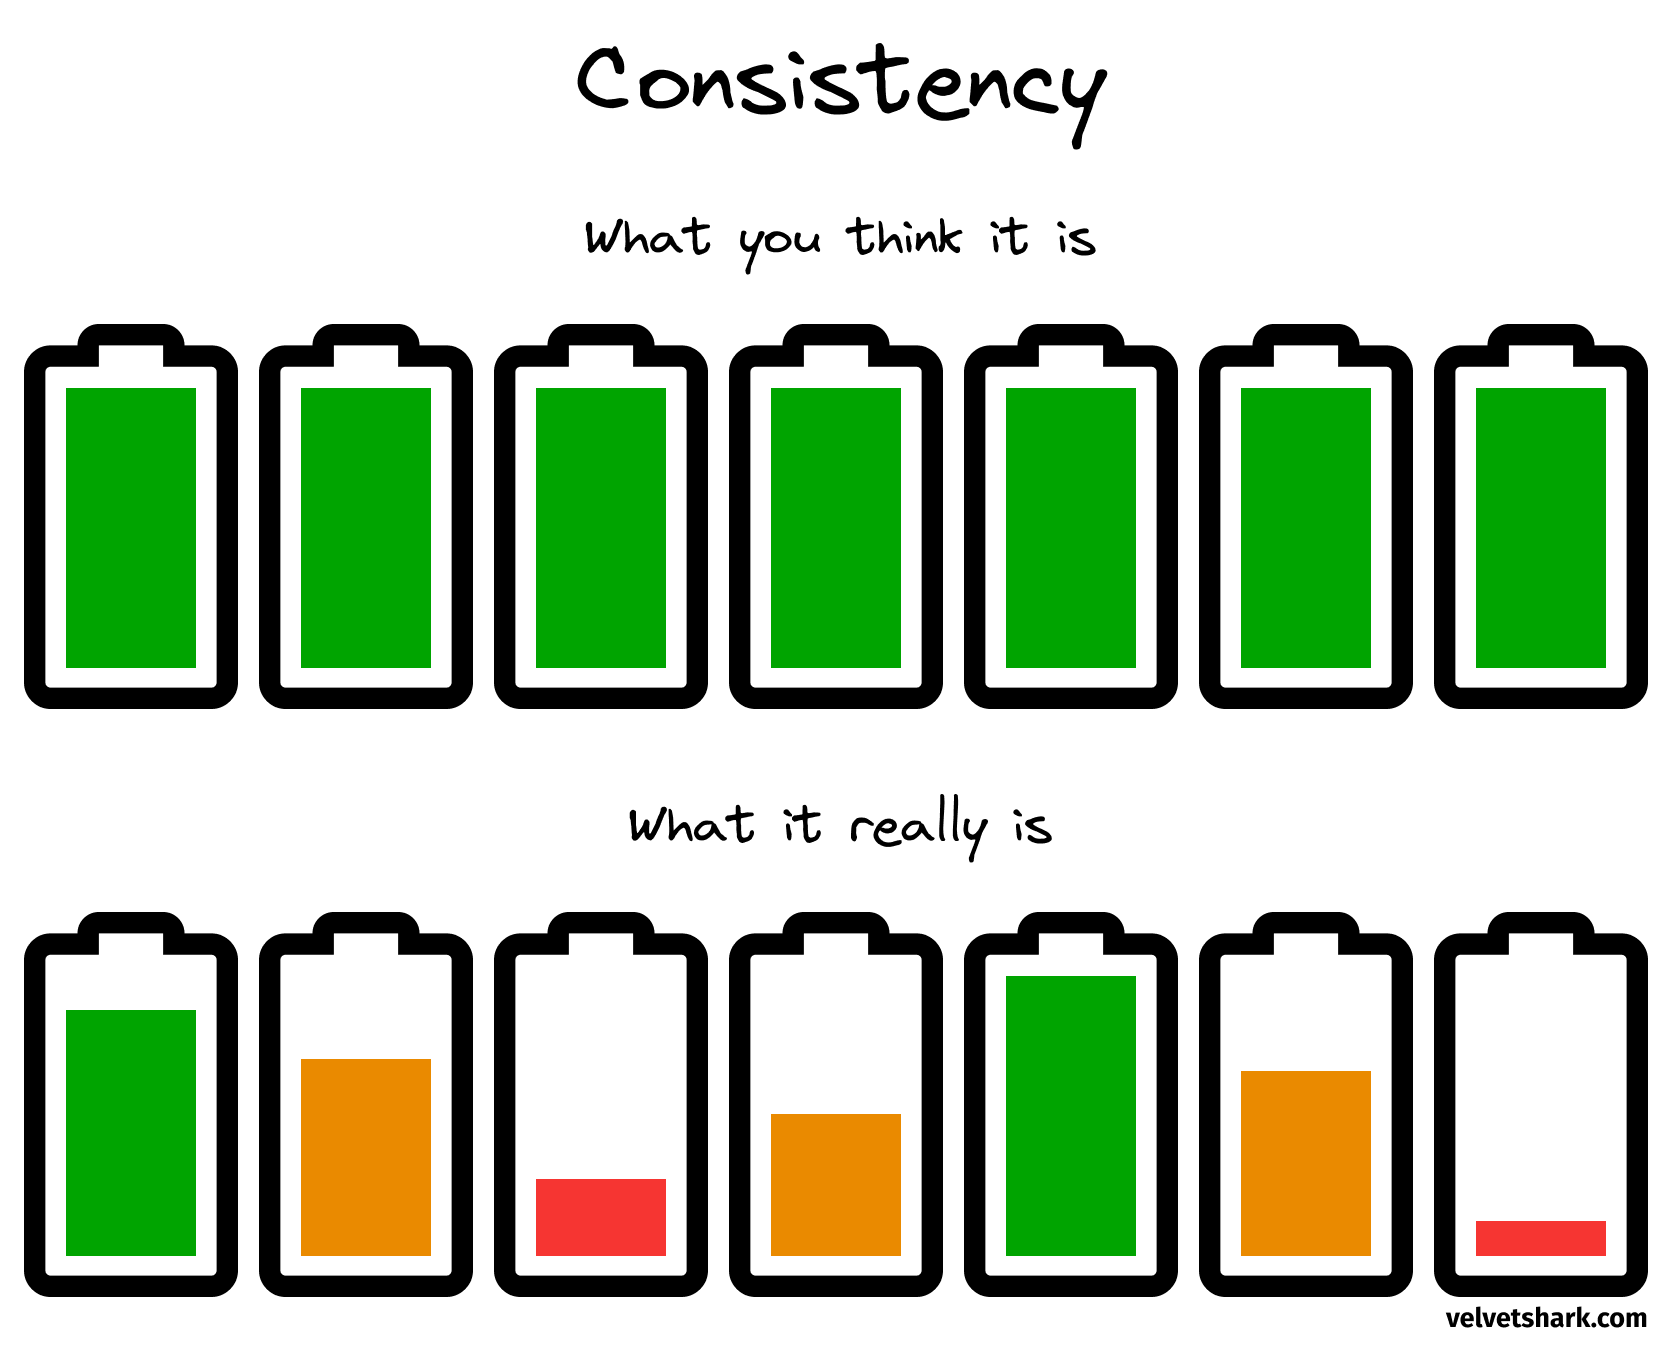 Consistency: what you think it is vs what it really is